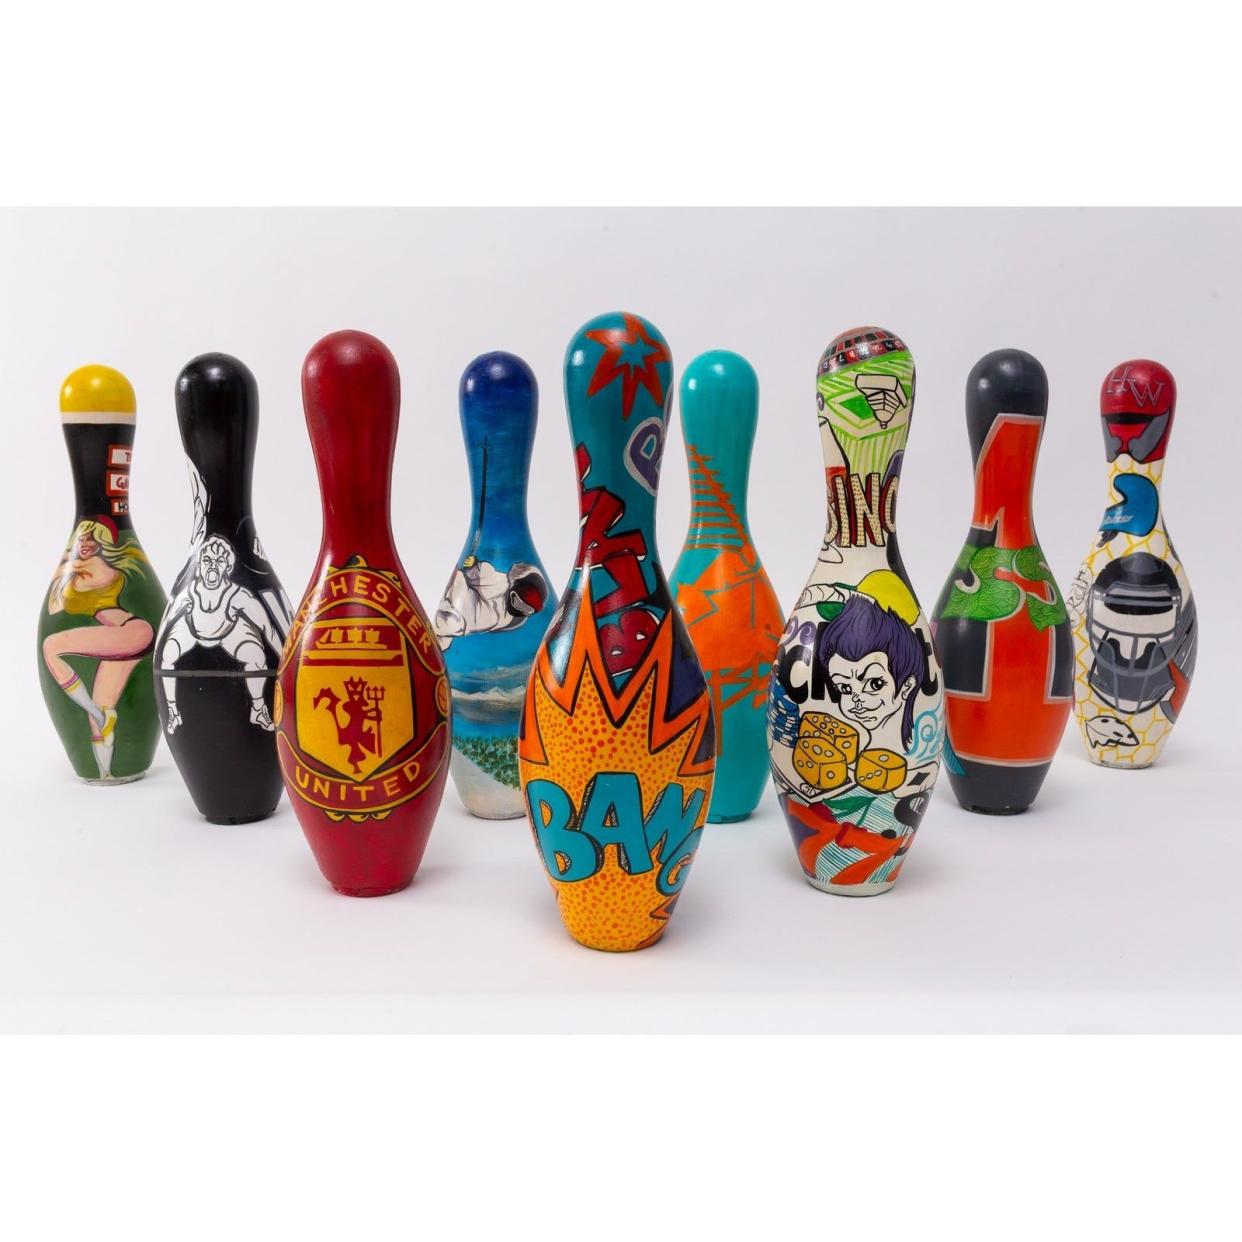 Decorated bowling pins from a former year's Pin and Ink Art Showcase.